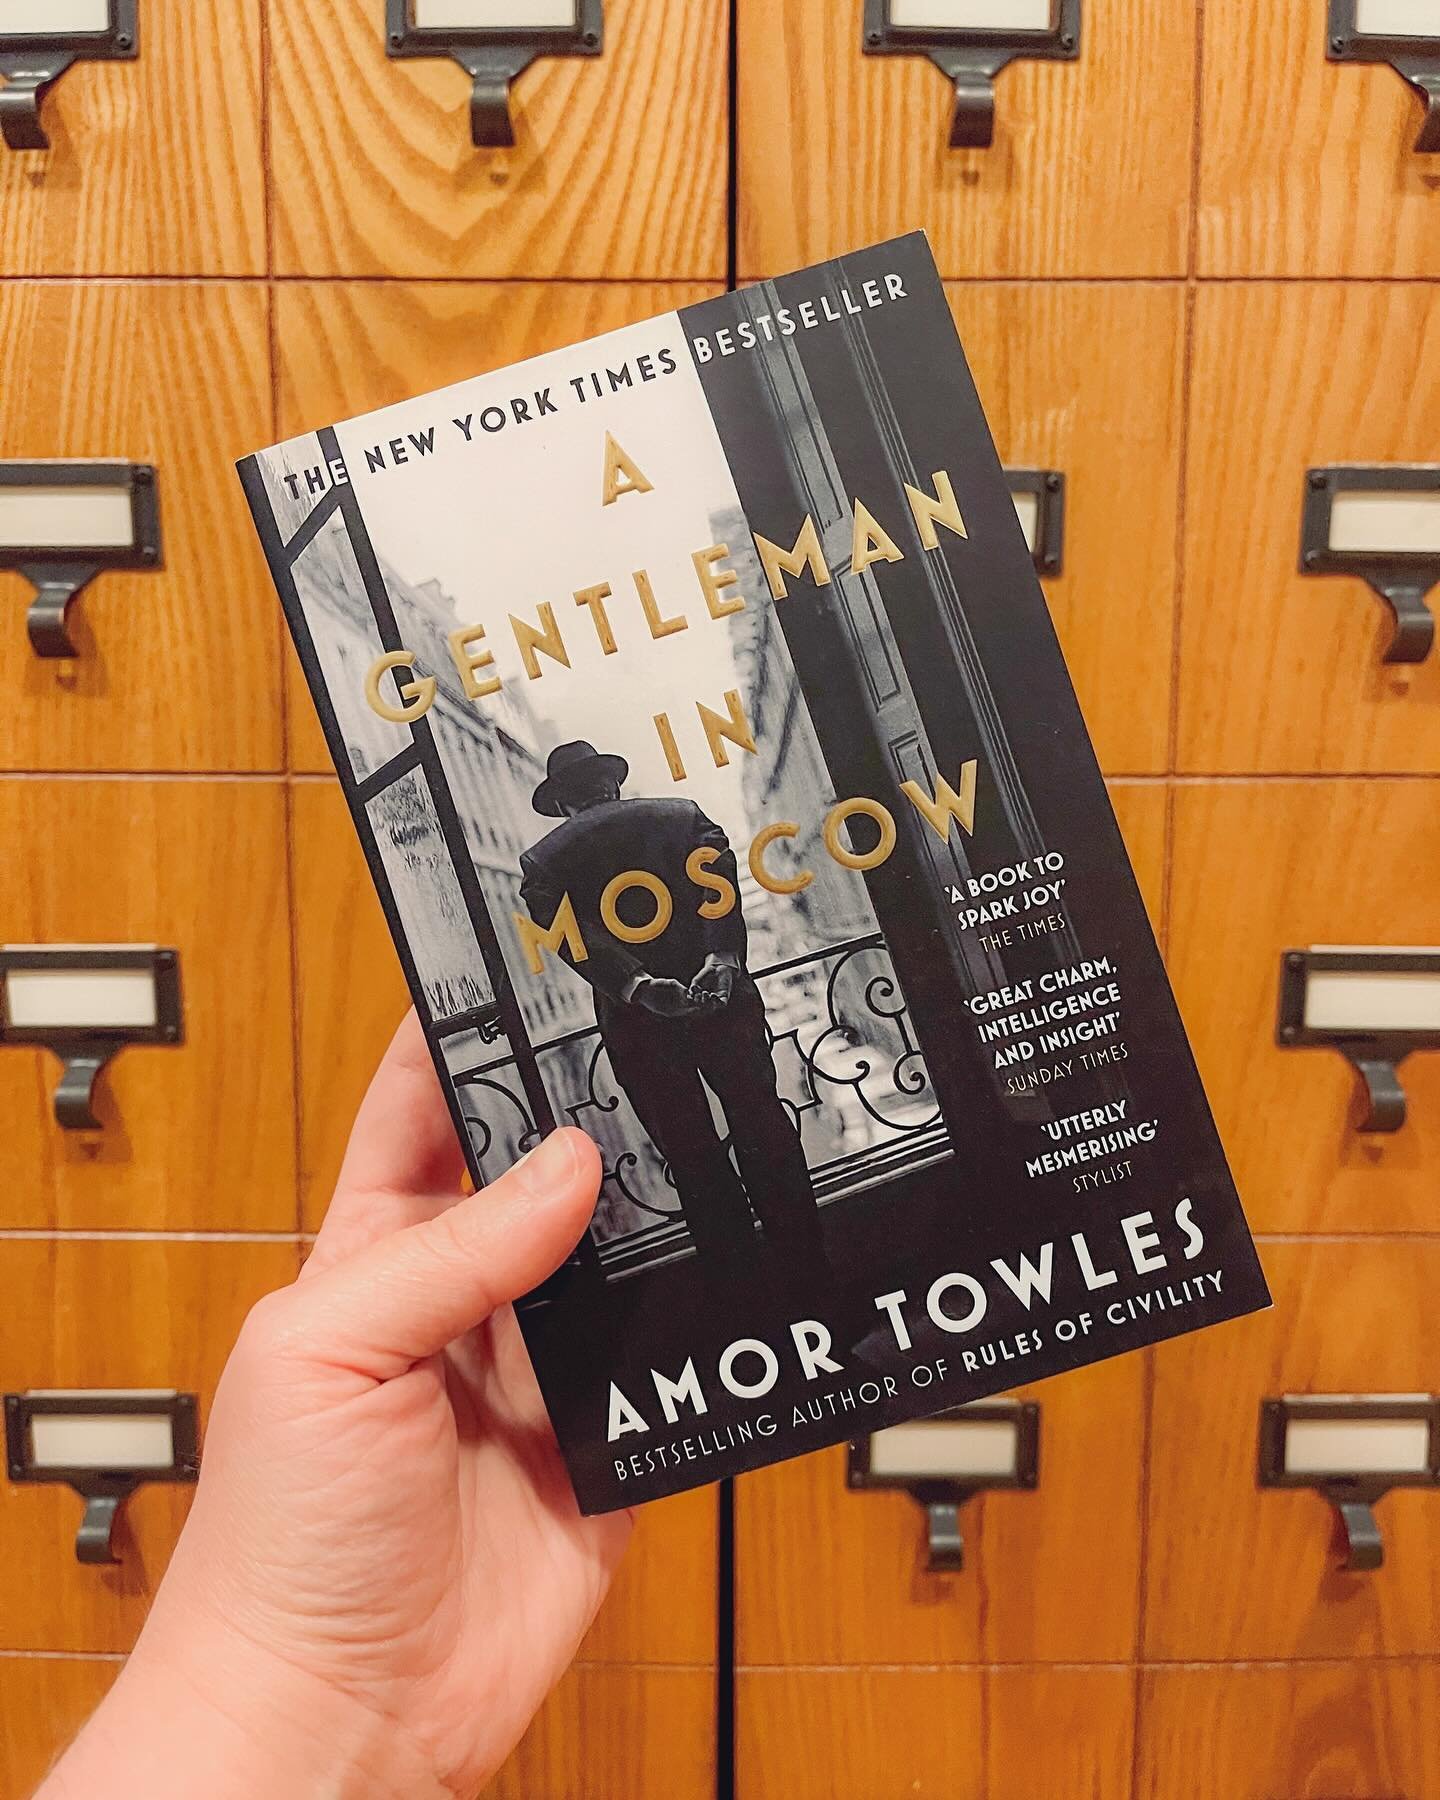 This month&rsquo;s pick for my Patreon Book Club! 🤓📖

I am excited to start reading &lsquo;A Gentleman in Moscow&rsquo; this weekend! What book(s) are you looking forward to reading? Let me know in the comments, if you please. 😊

#erinjandacreativ